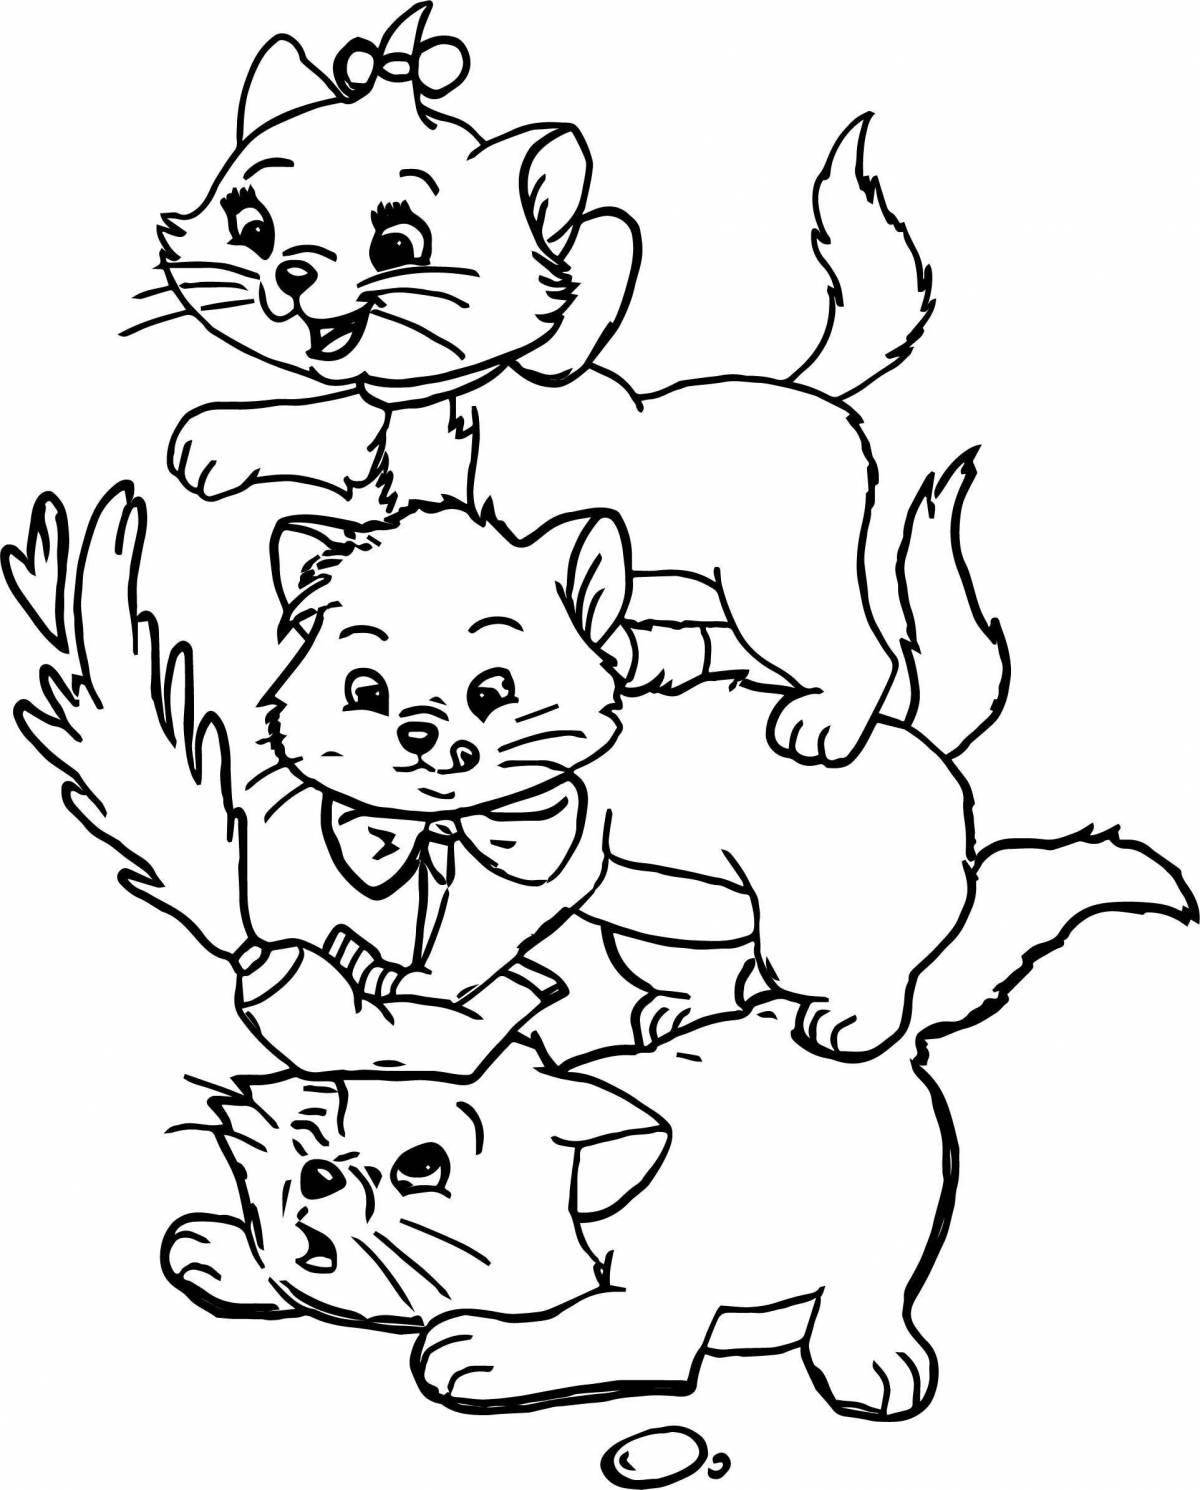 Fancy cat and dog coloring book